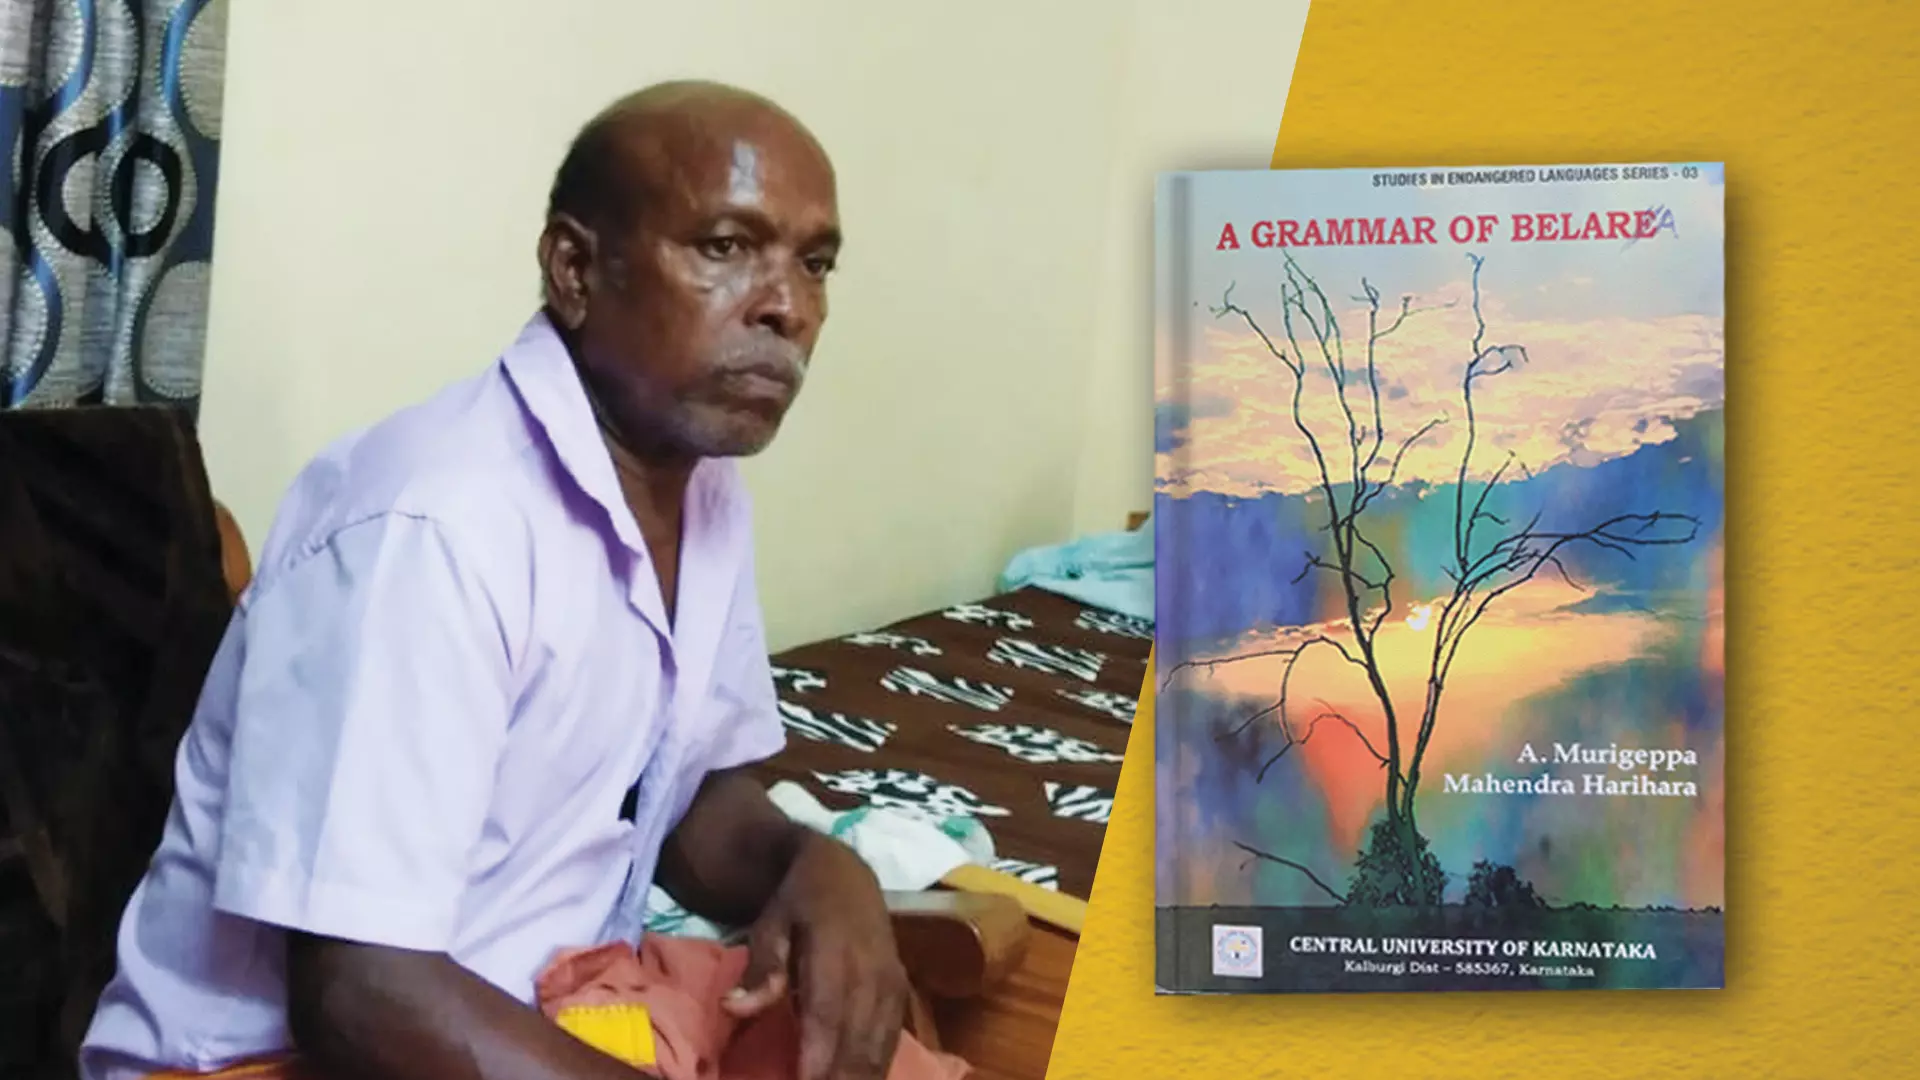 Belare language dies with Sidda Belare: Why languages never die alone